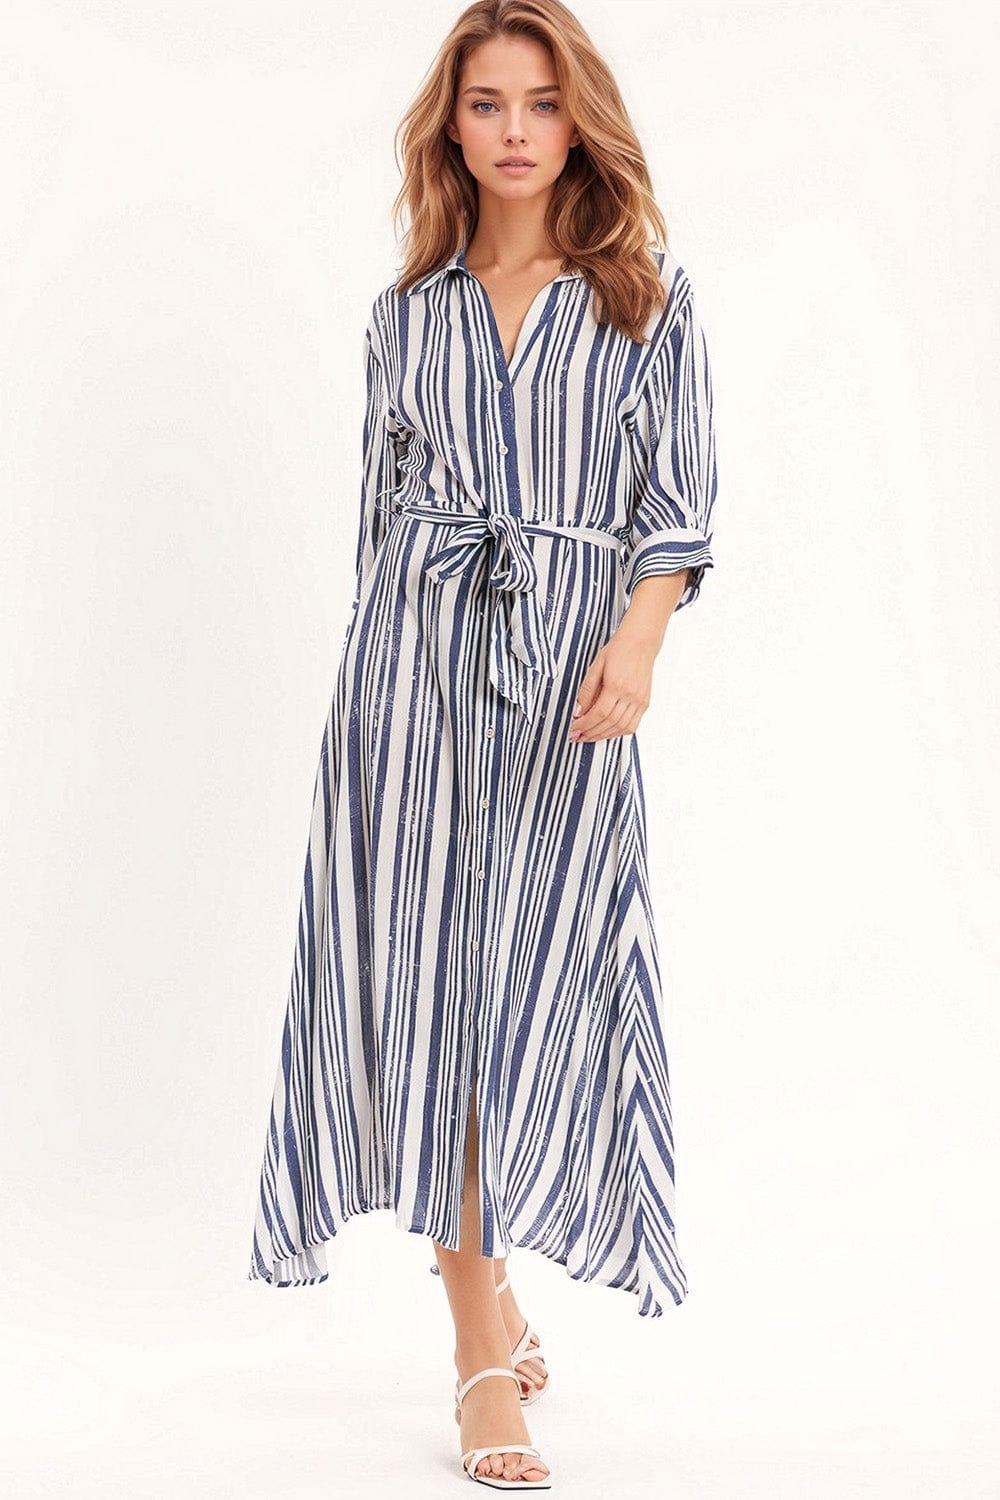 Q2 Women's Dress Striped Maxi Shirt Dress With 3/4 Sleeve And Belt In Blue And White